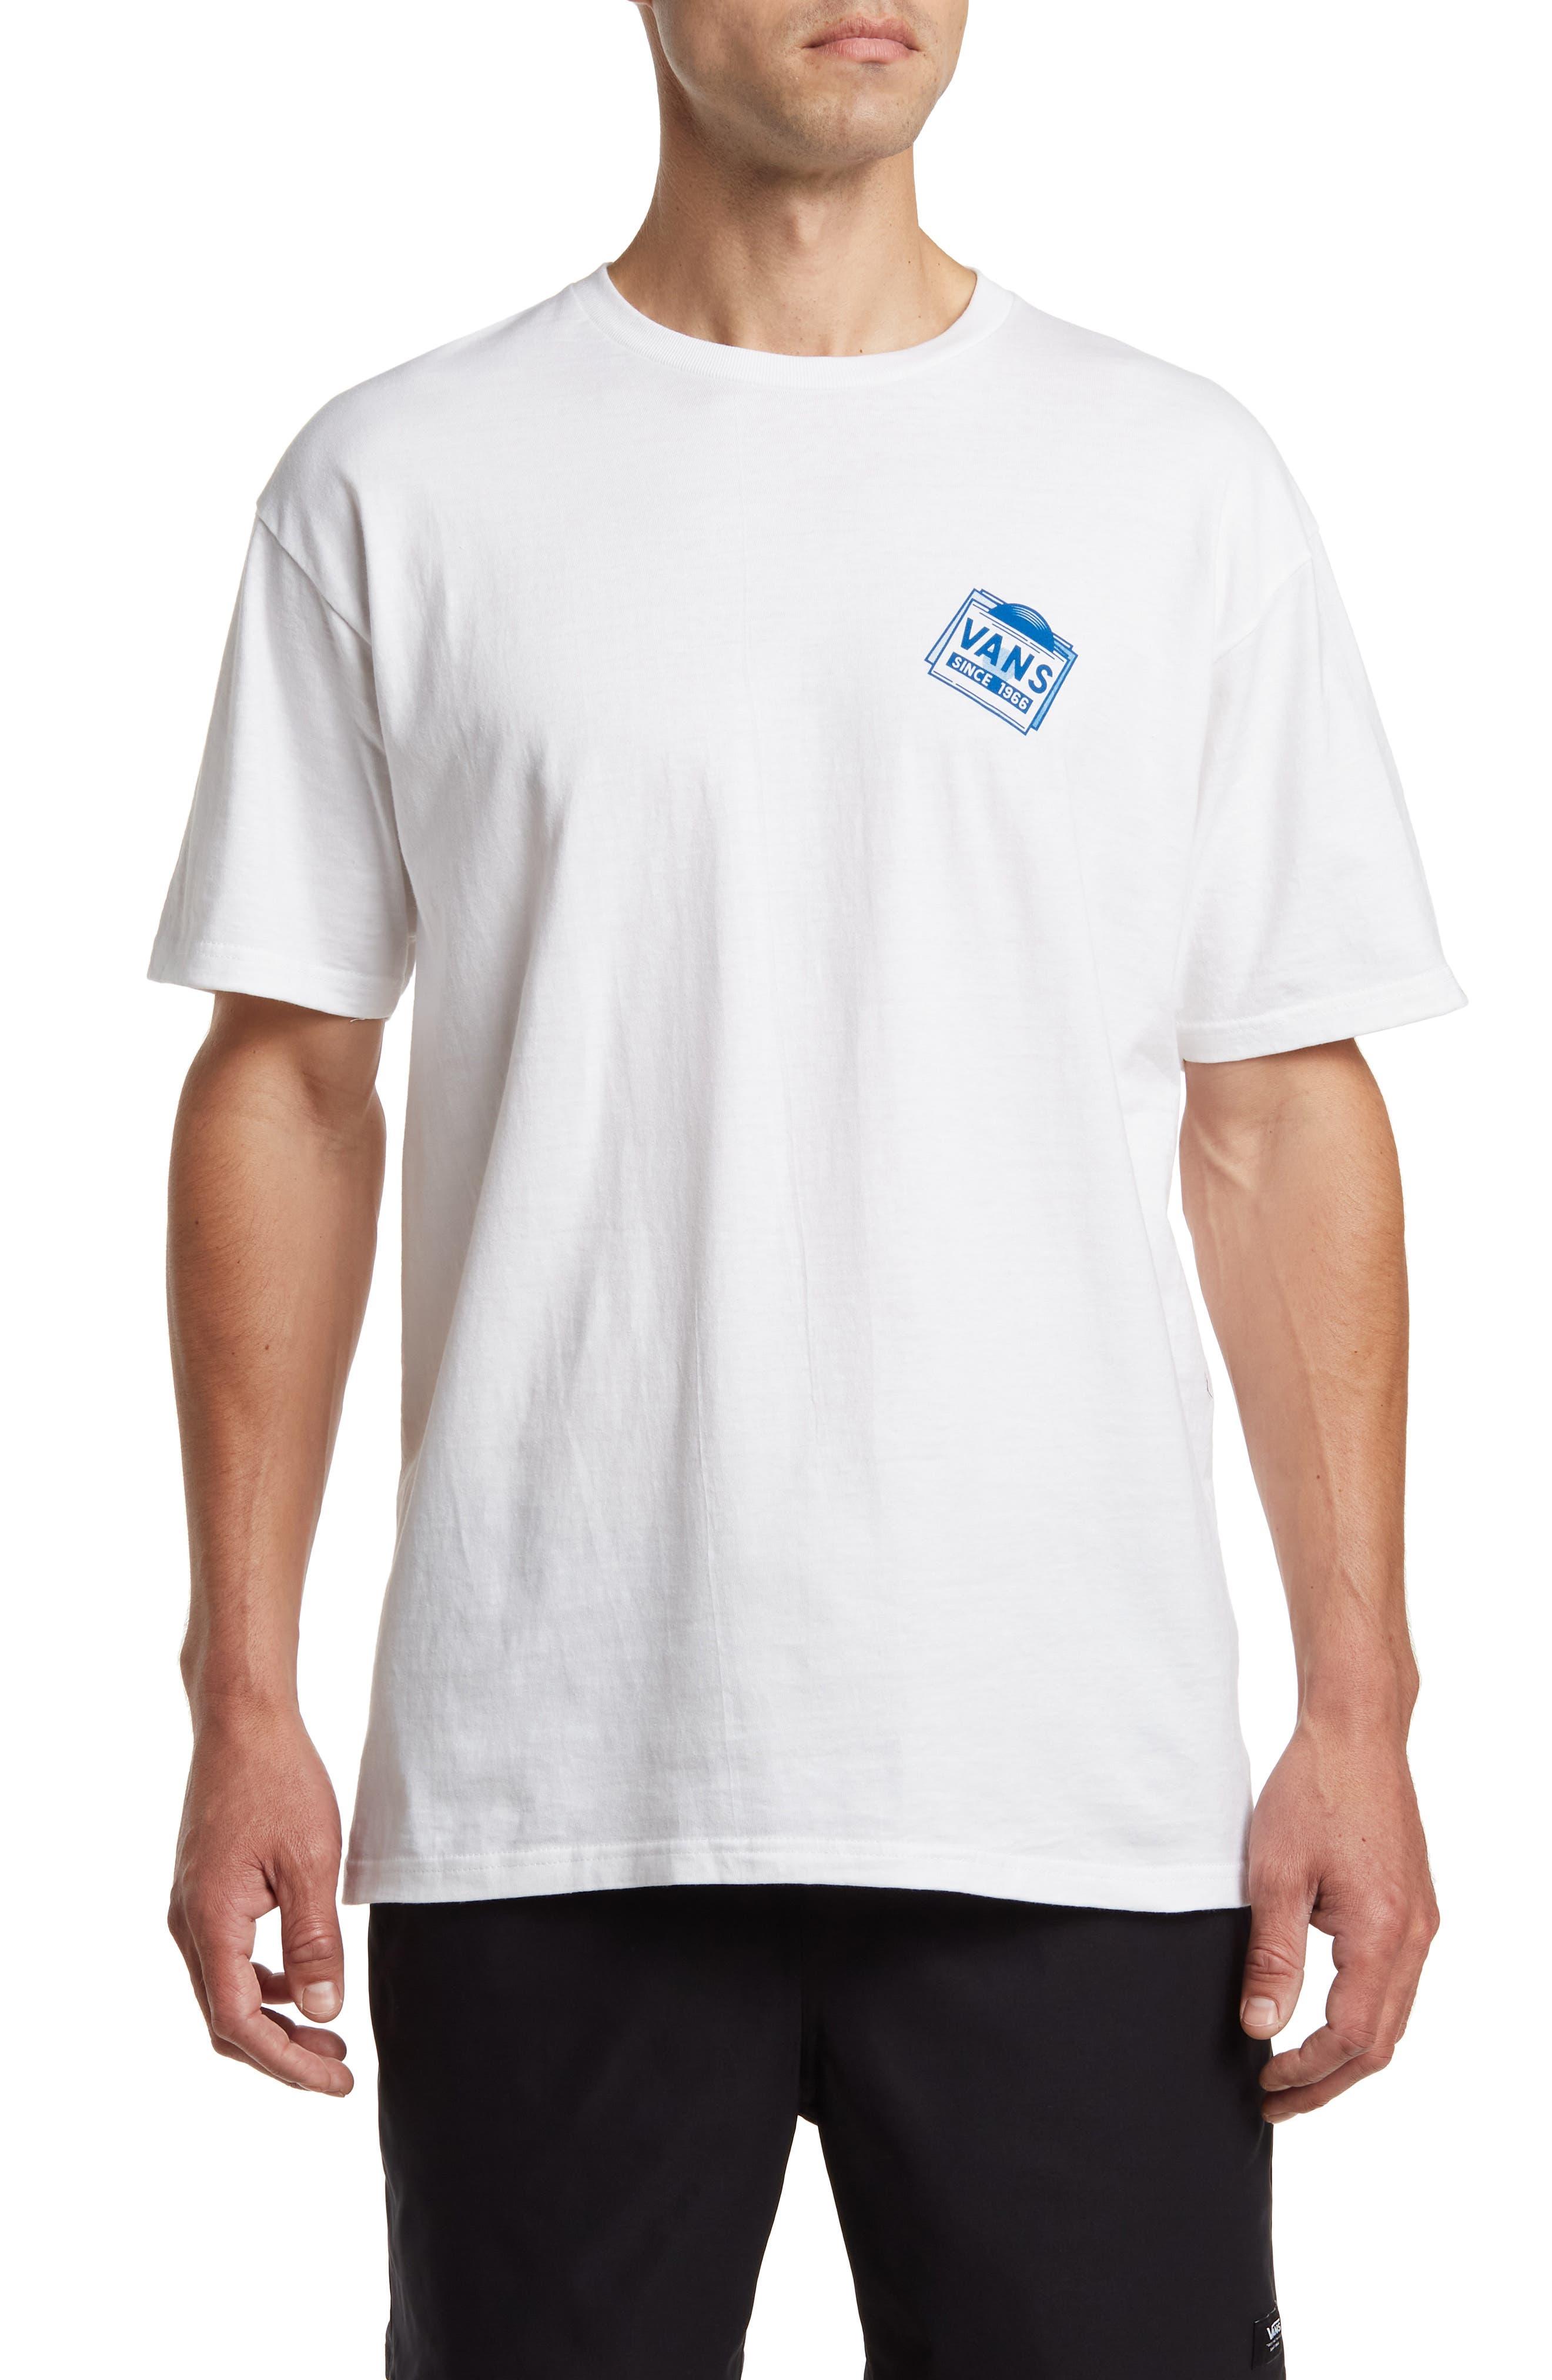 Vans Record Label Cotton Graphic T-shirt in White for Men | Lyst